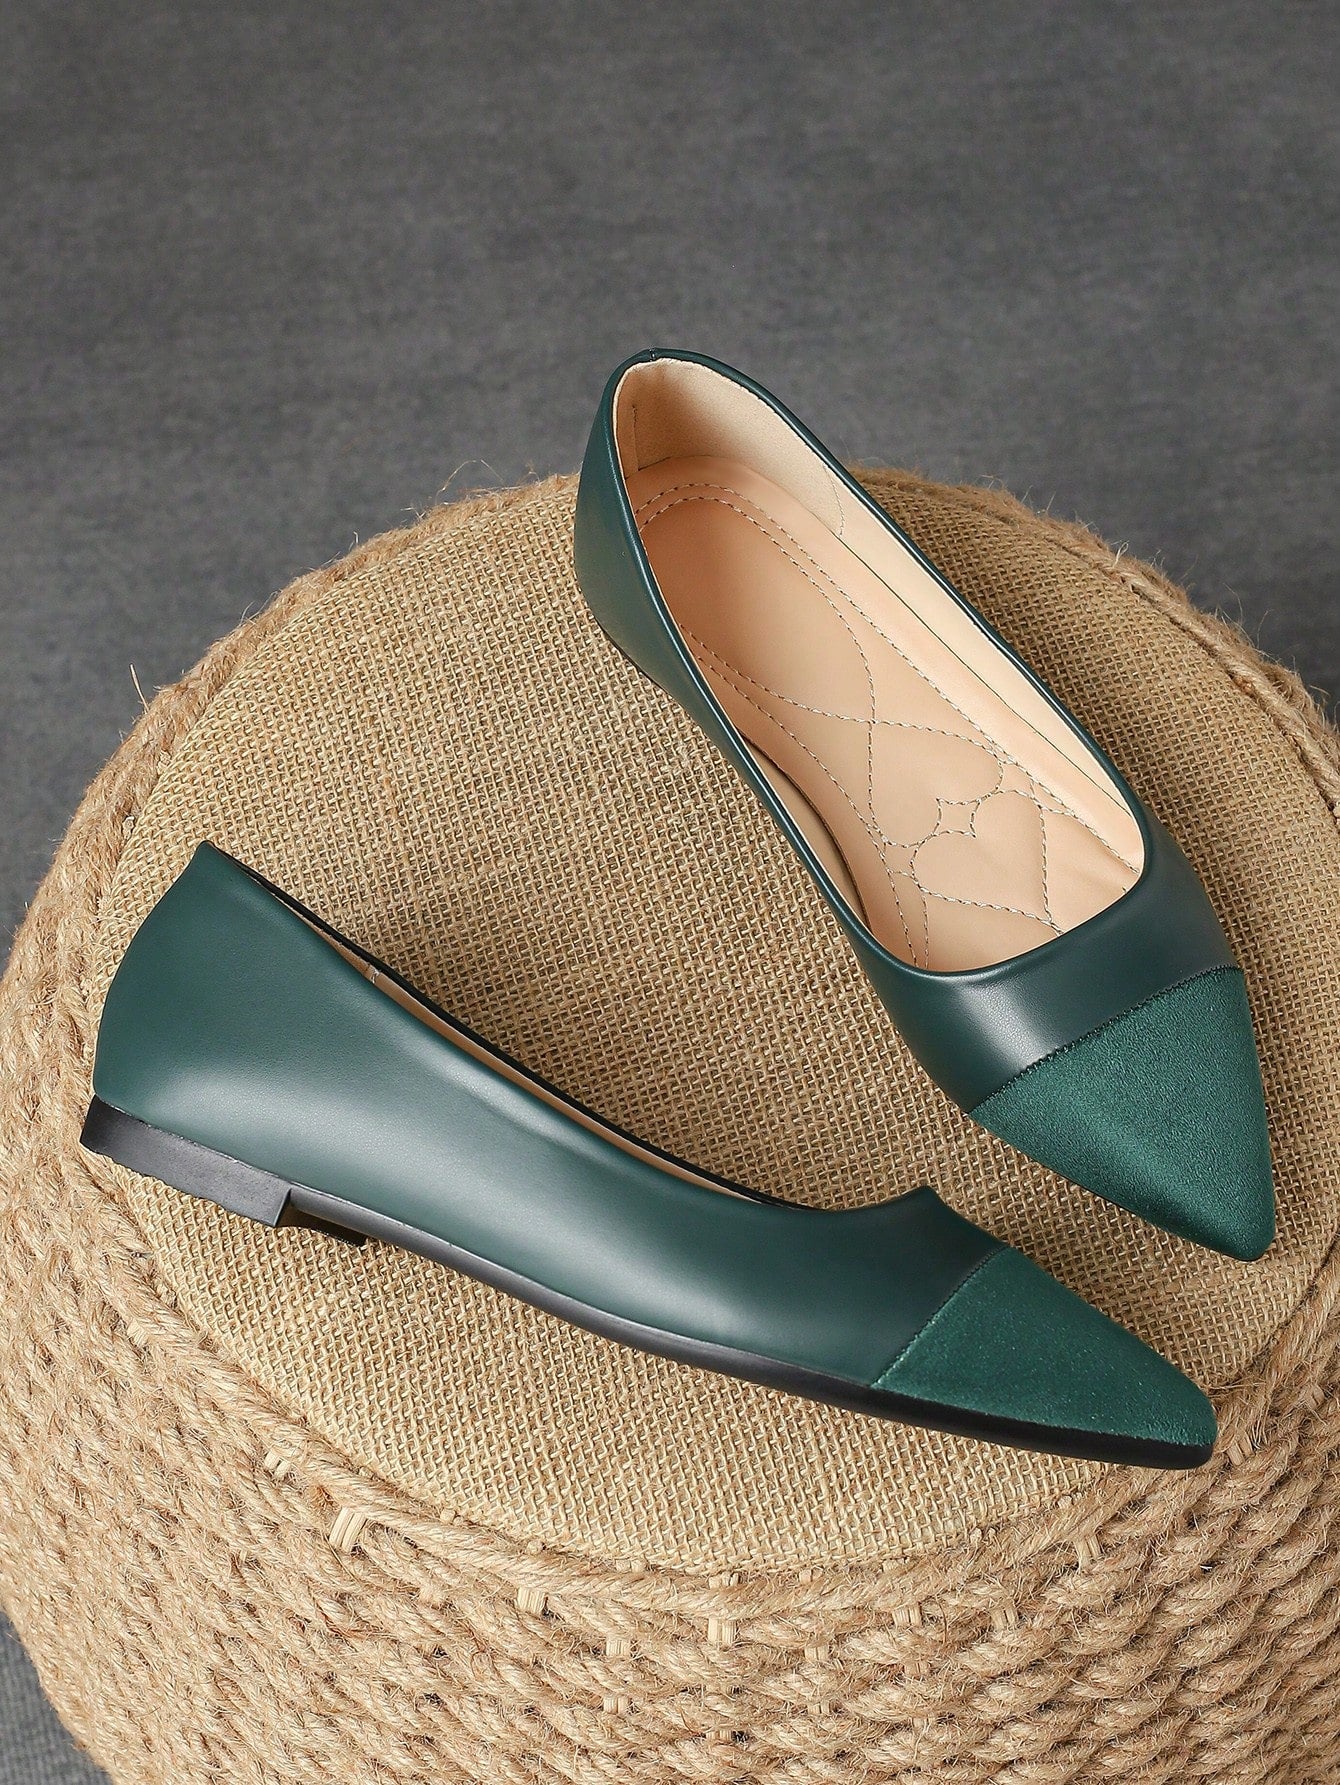 Women's Patchwork Pointed Toe Flat Shoes, Suitable For Daily Commuting And Office Work In Autumn, Black-Olive Green-2